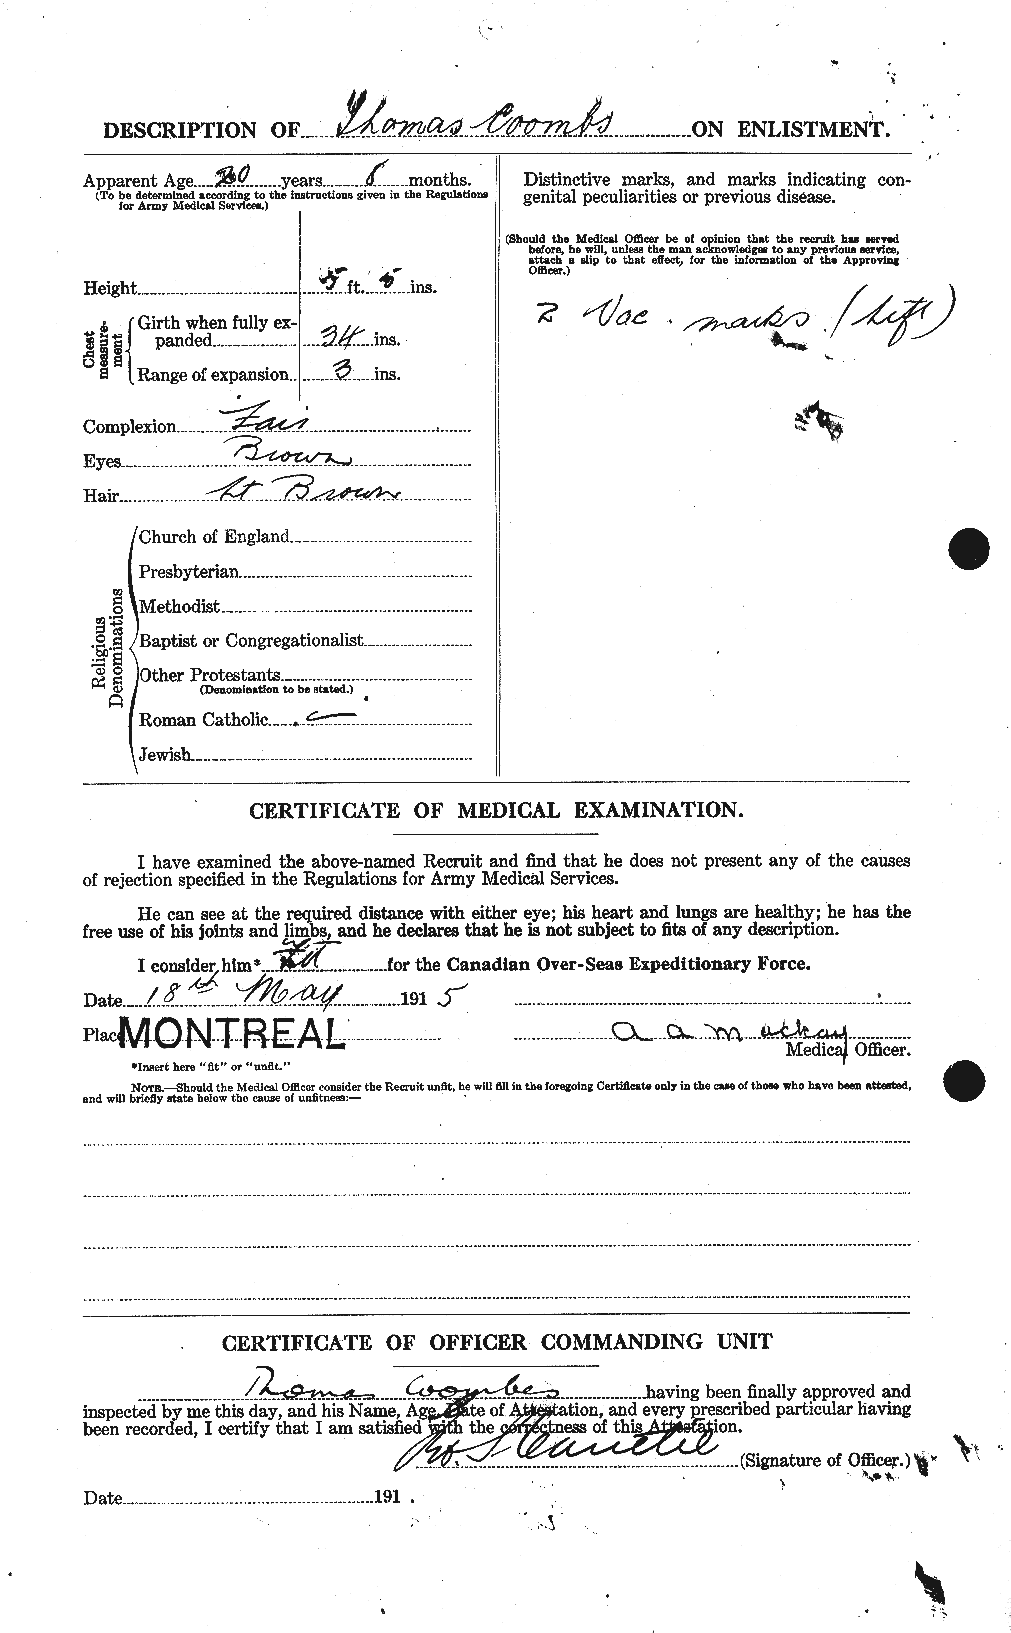 Personnel Records of the First World War - CEF 055501b